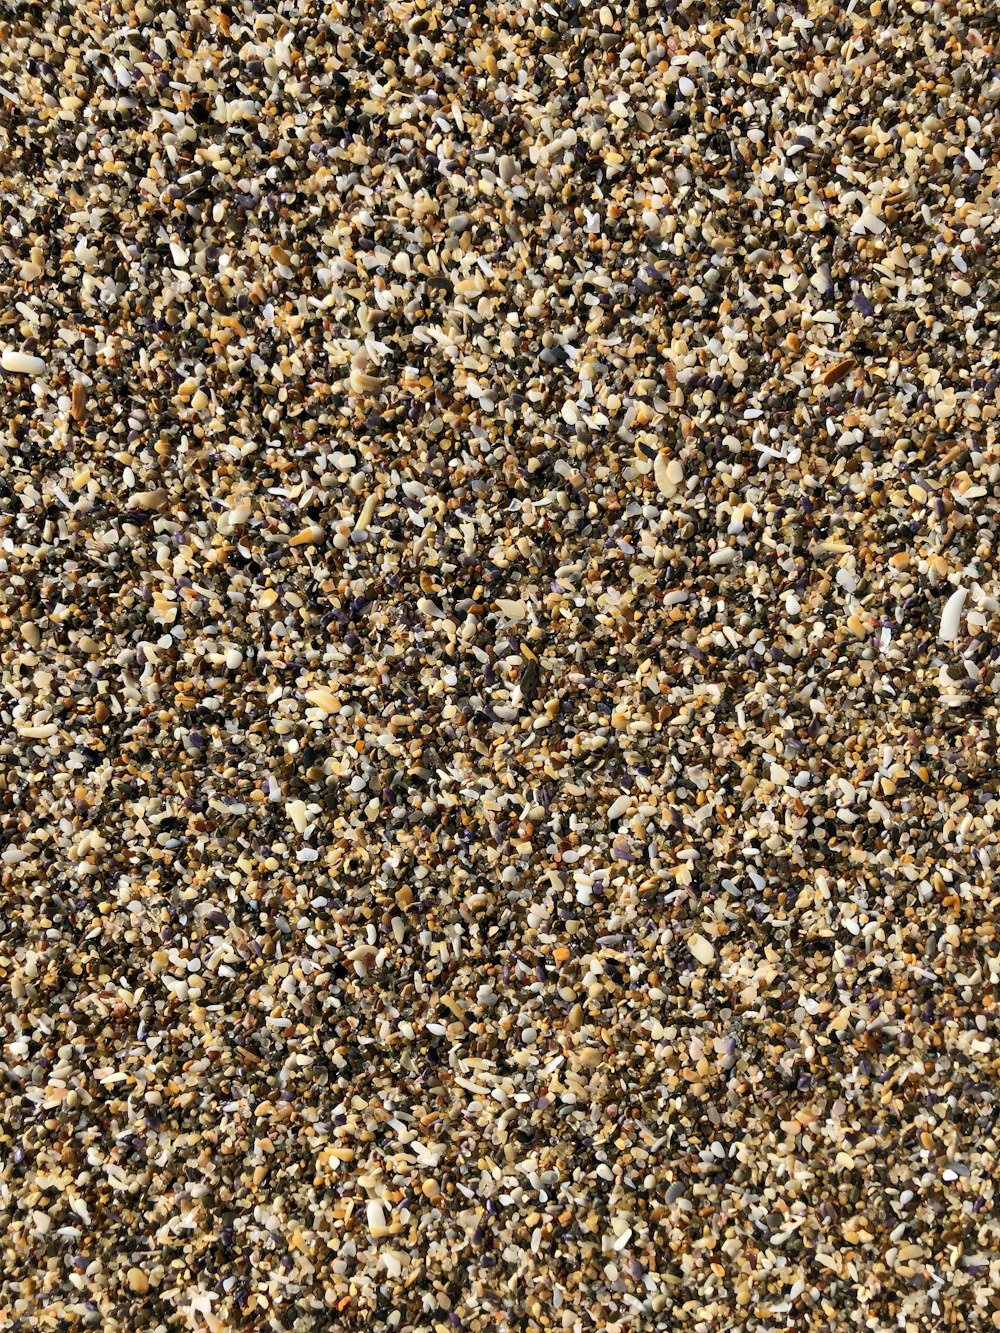 a close up of a brown and white speckled surface